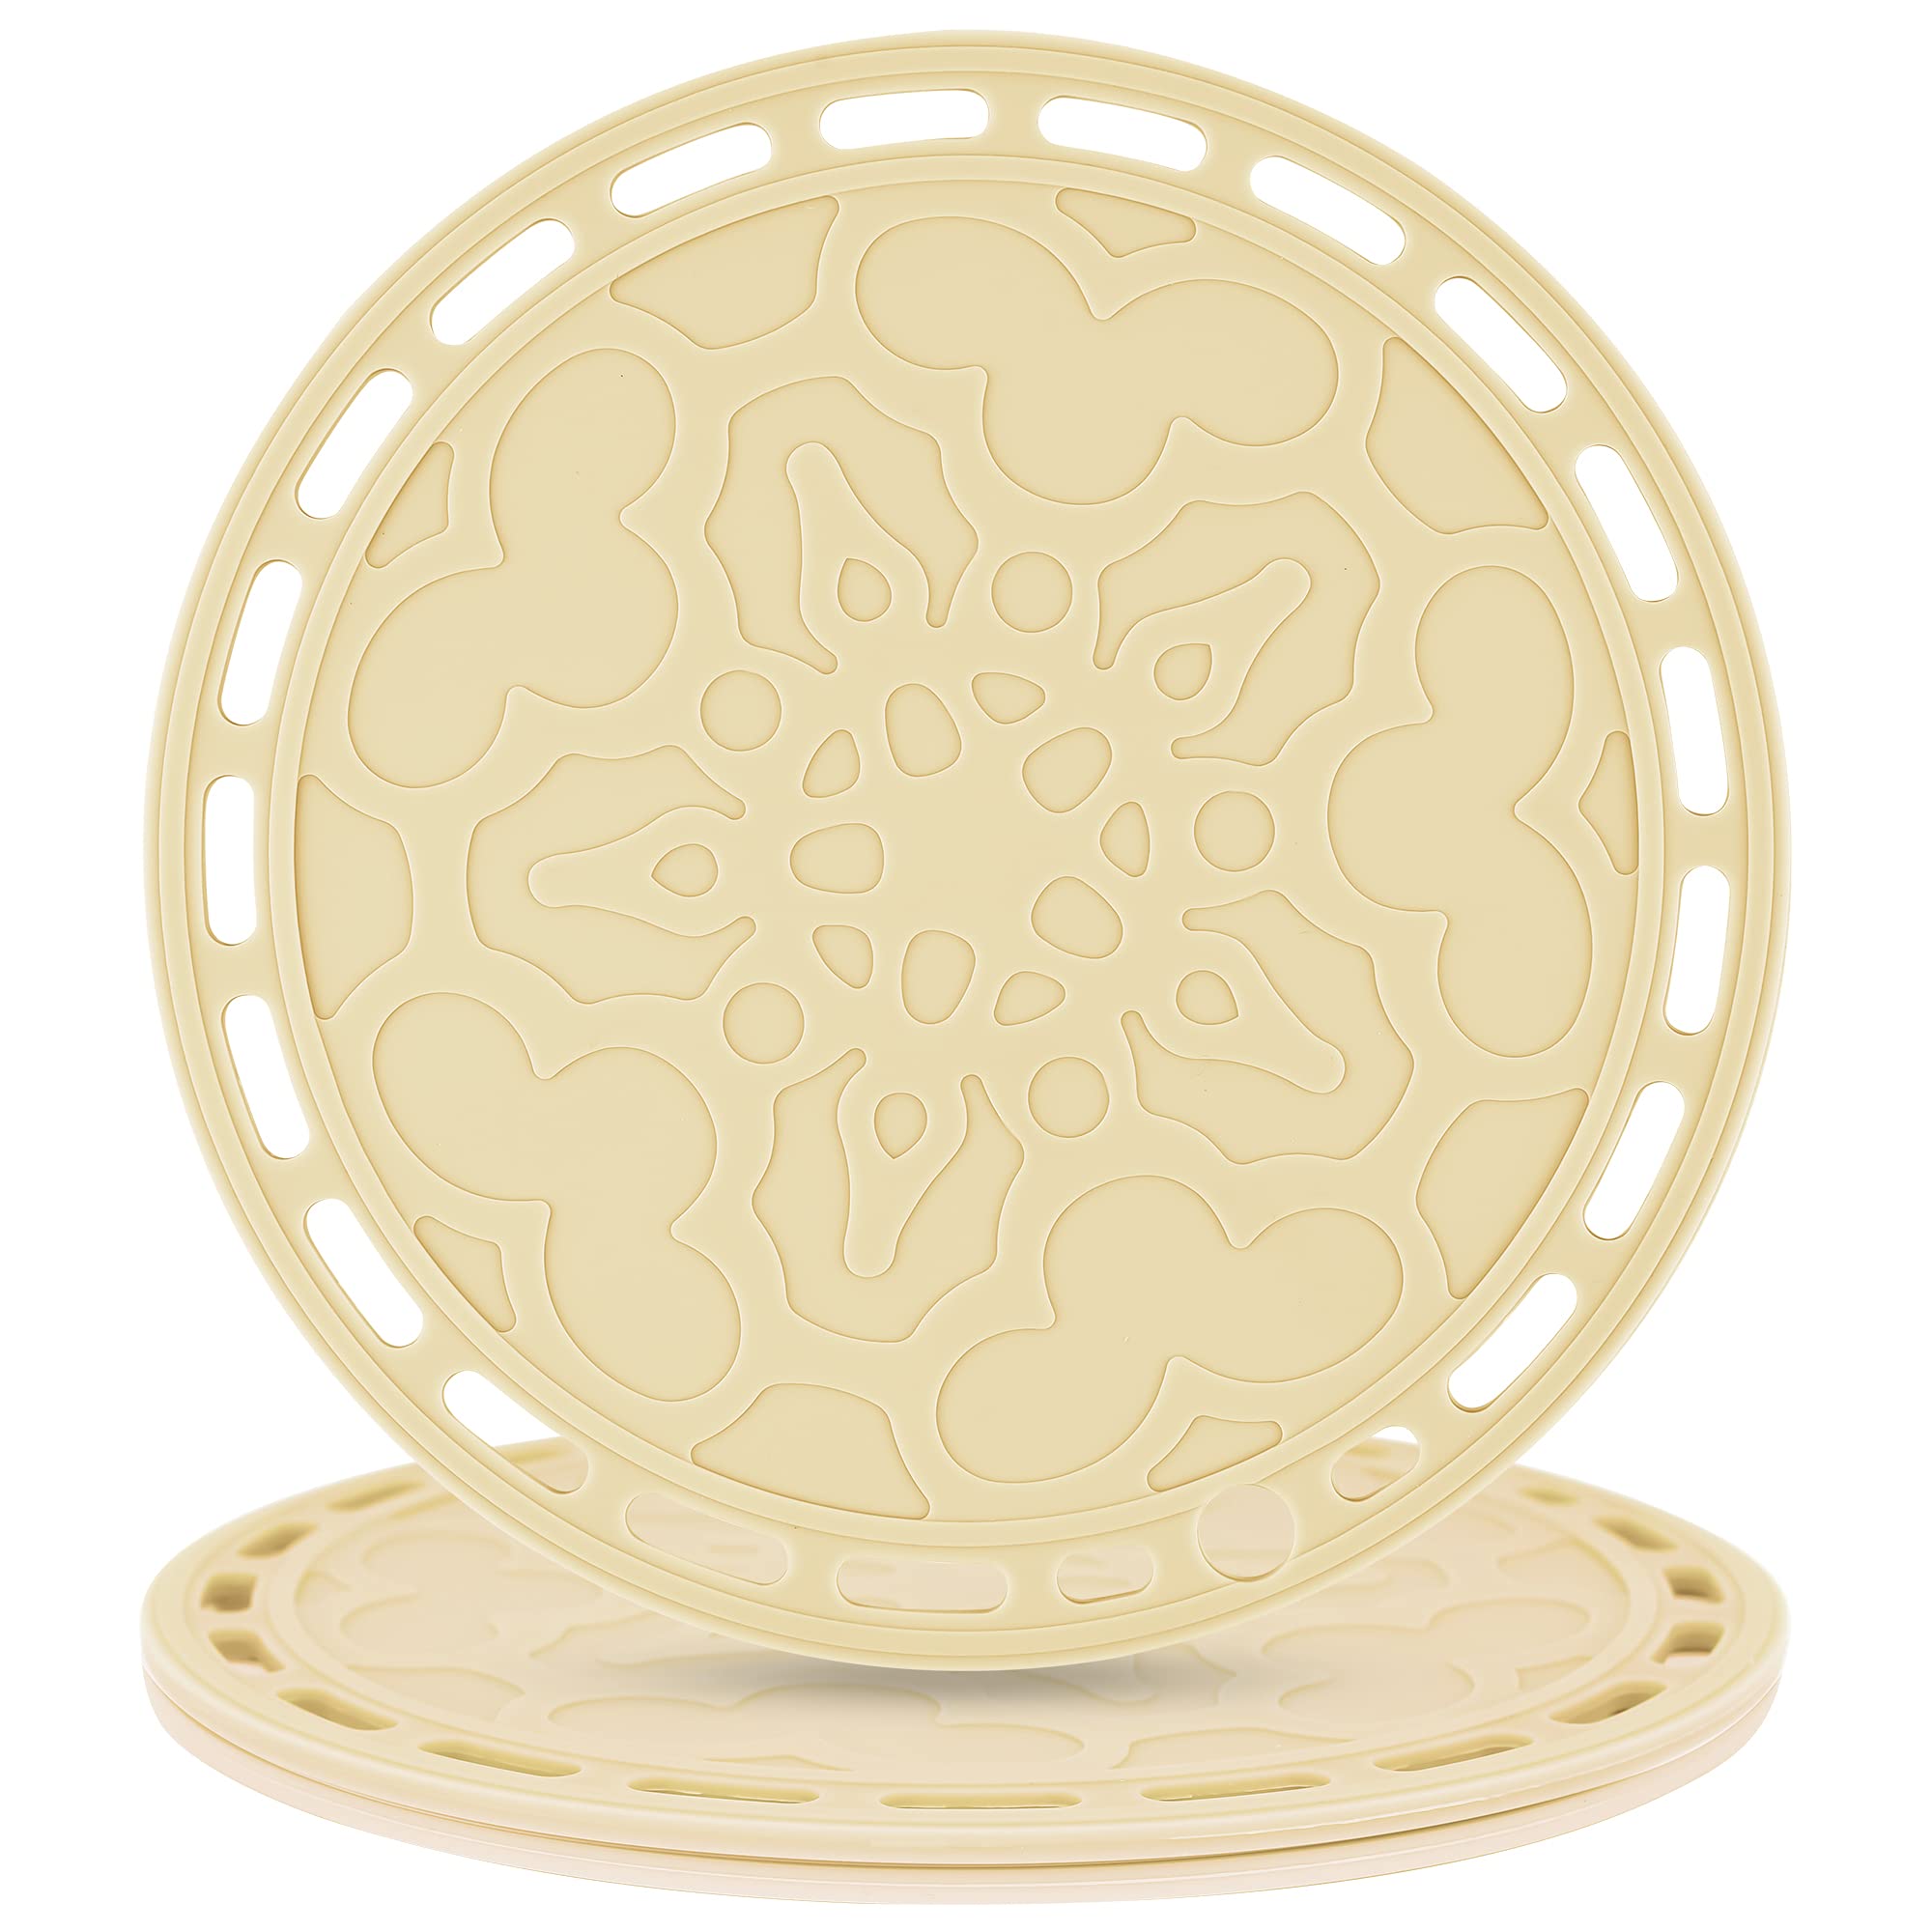 Smithcraft Silicone Trivets Mats Big Round Silicone Pot Holder Hot Pads and Trivets for Hot Dishes and Hot Pots, Hot Mats for Countertops, Tables, Spoon Rest Small Place Mats Set of 3 (Beige)